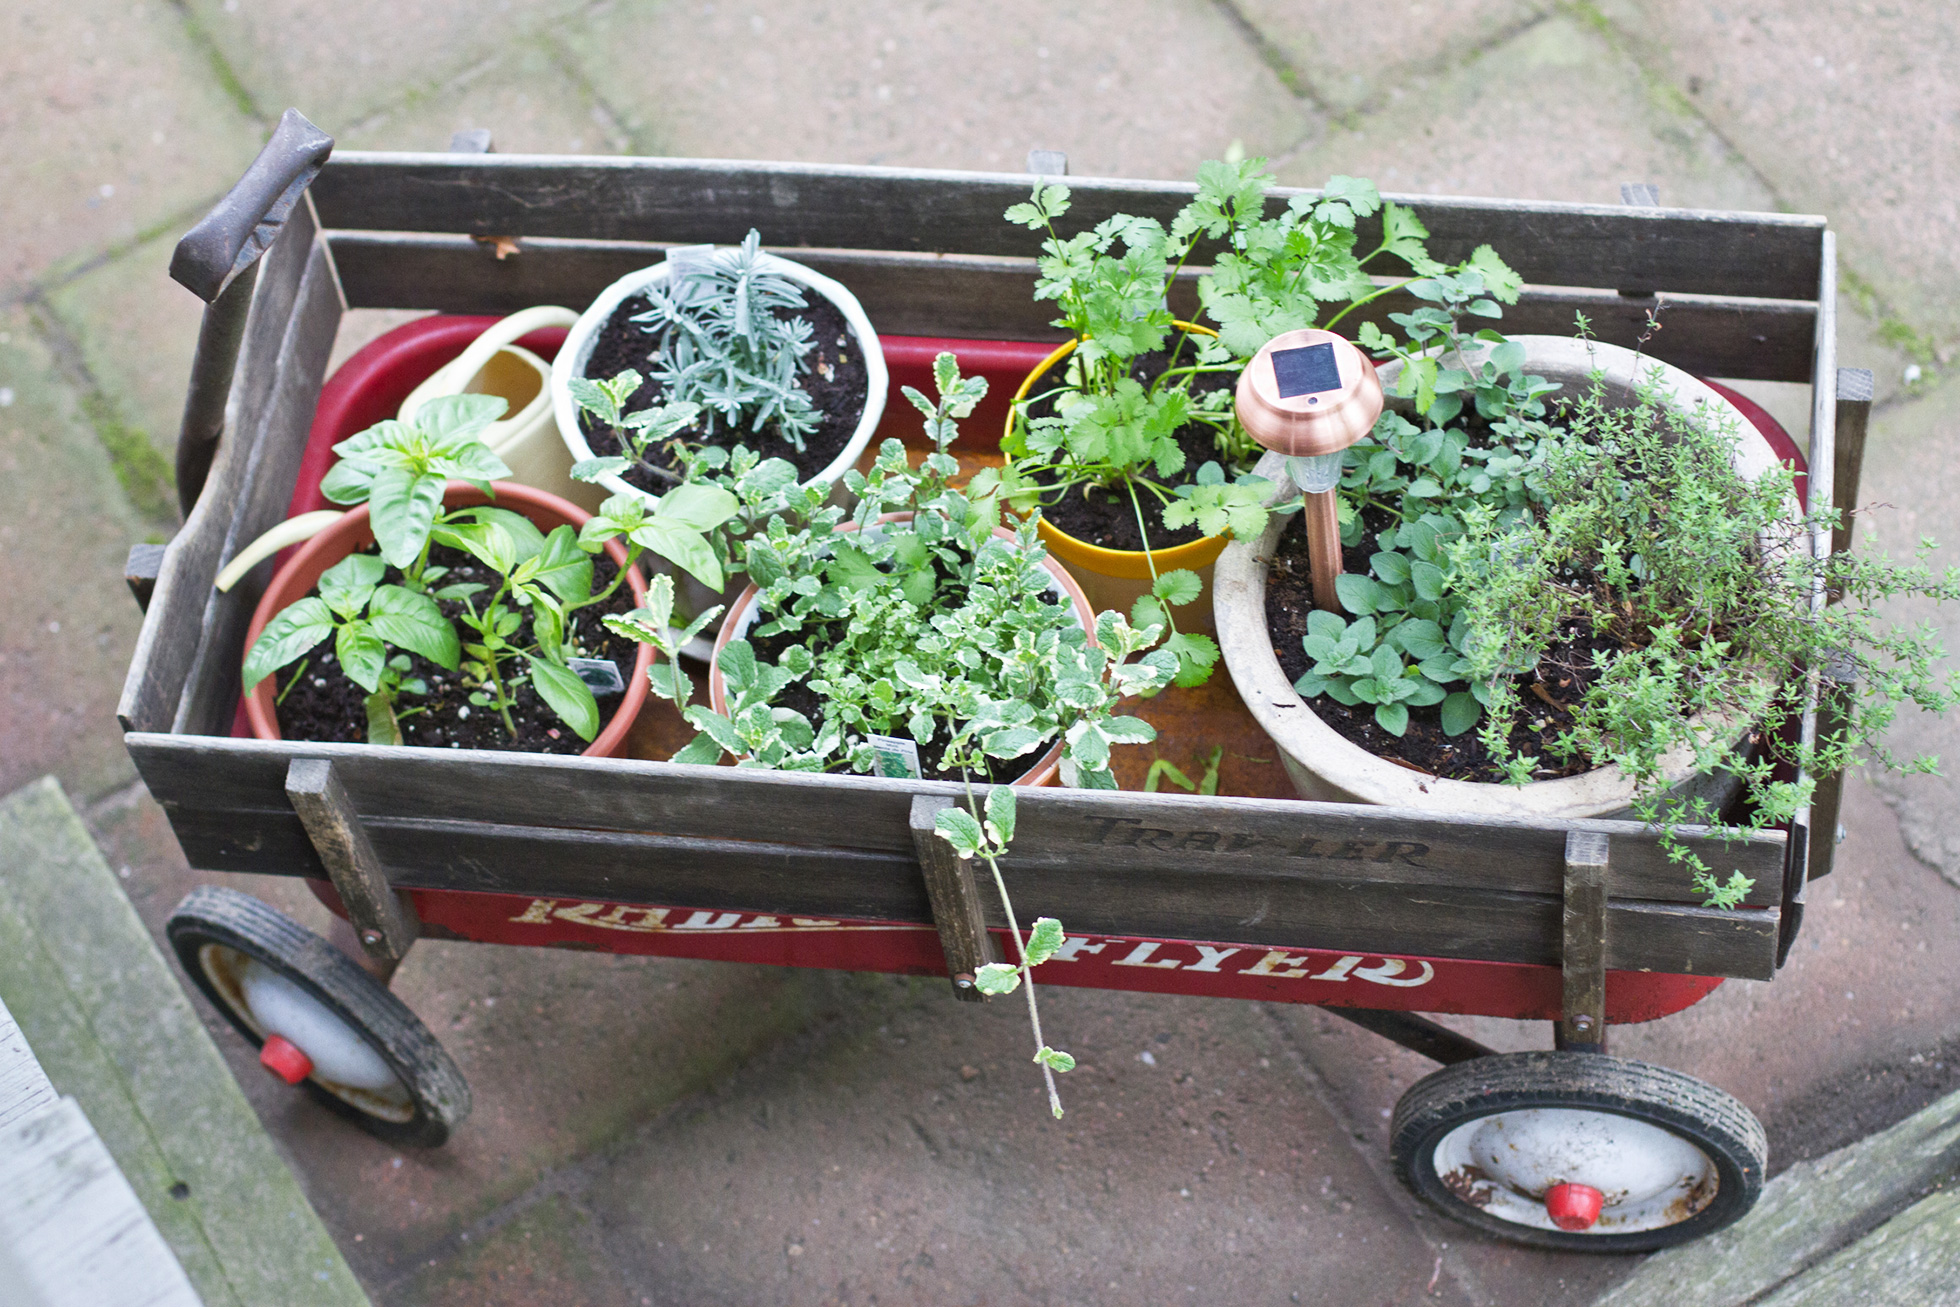 A red wagon filled with herbs